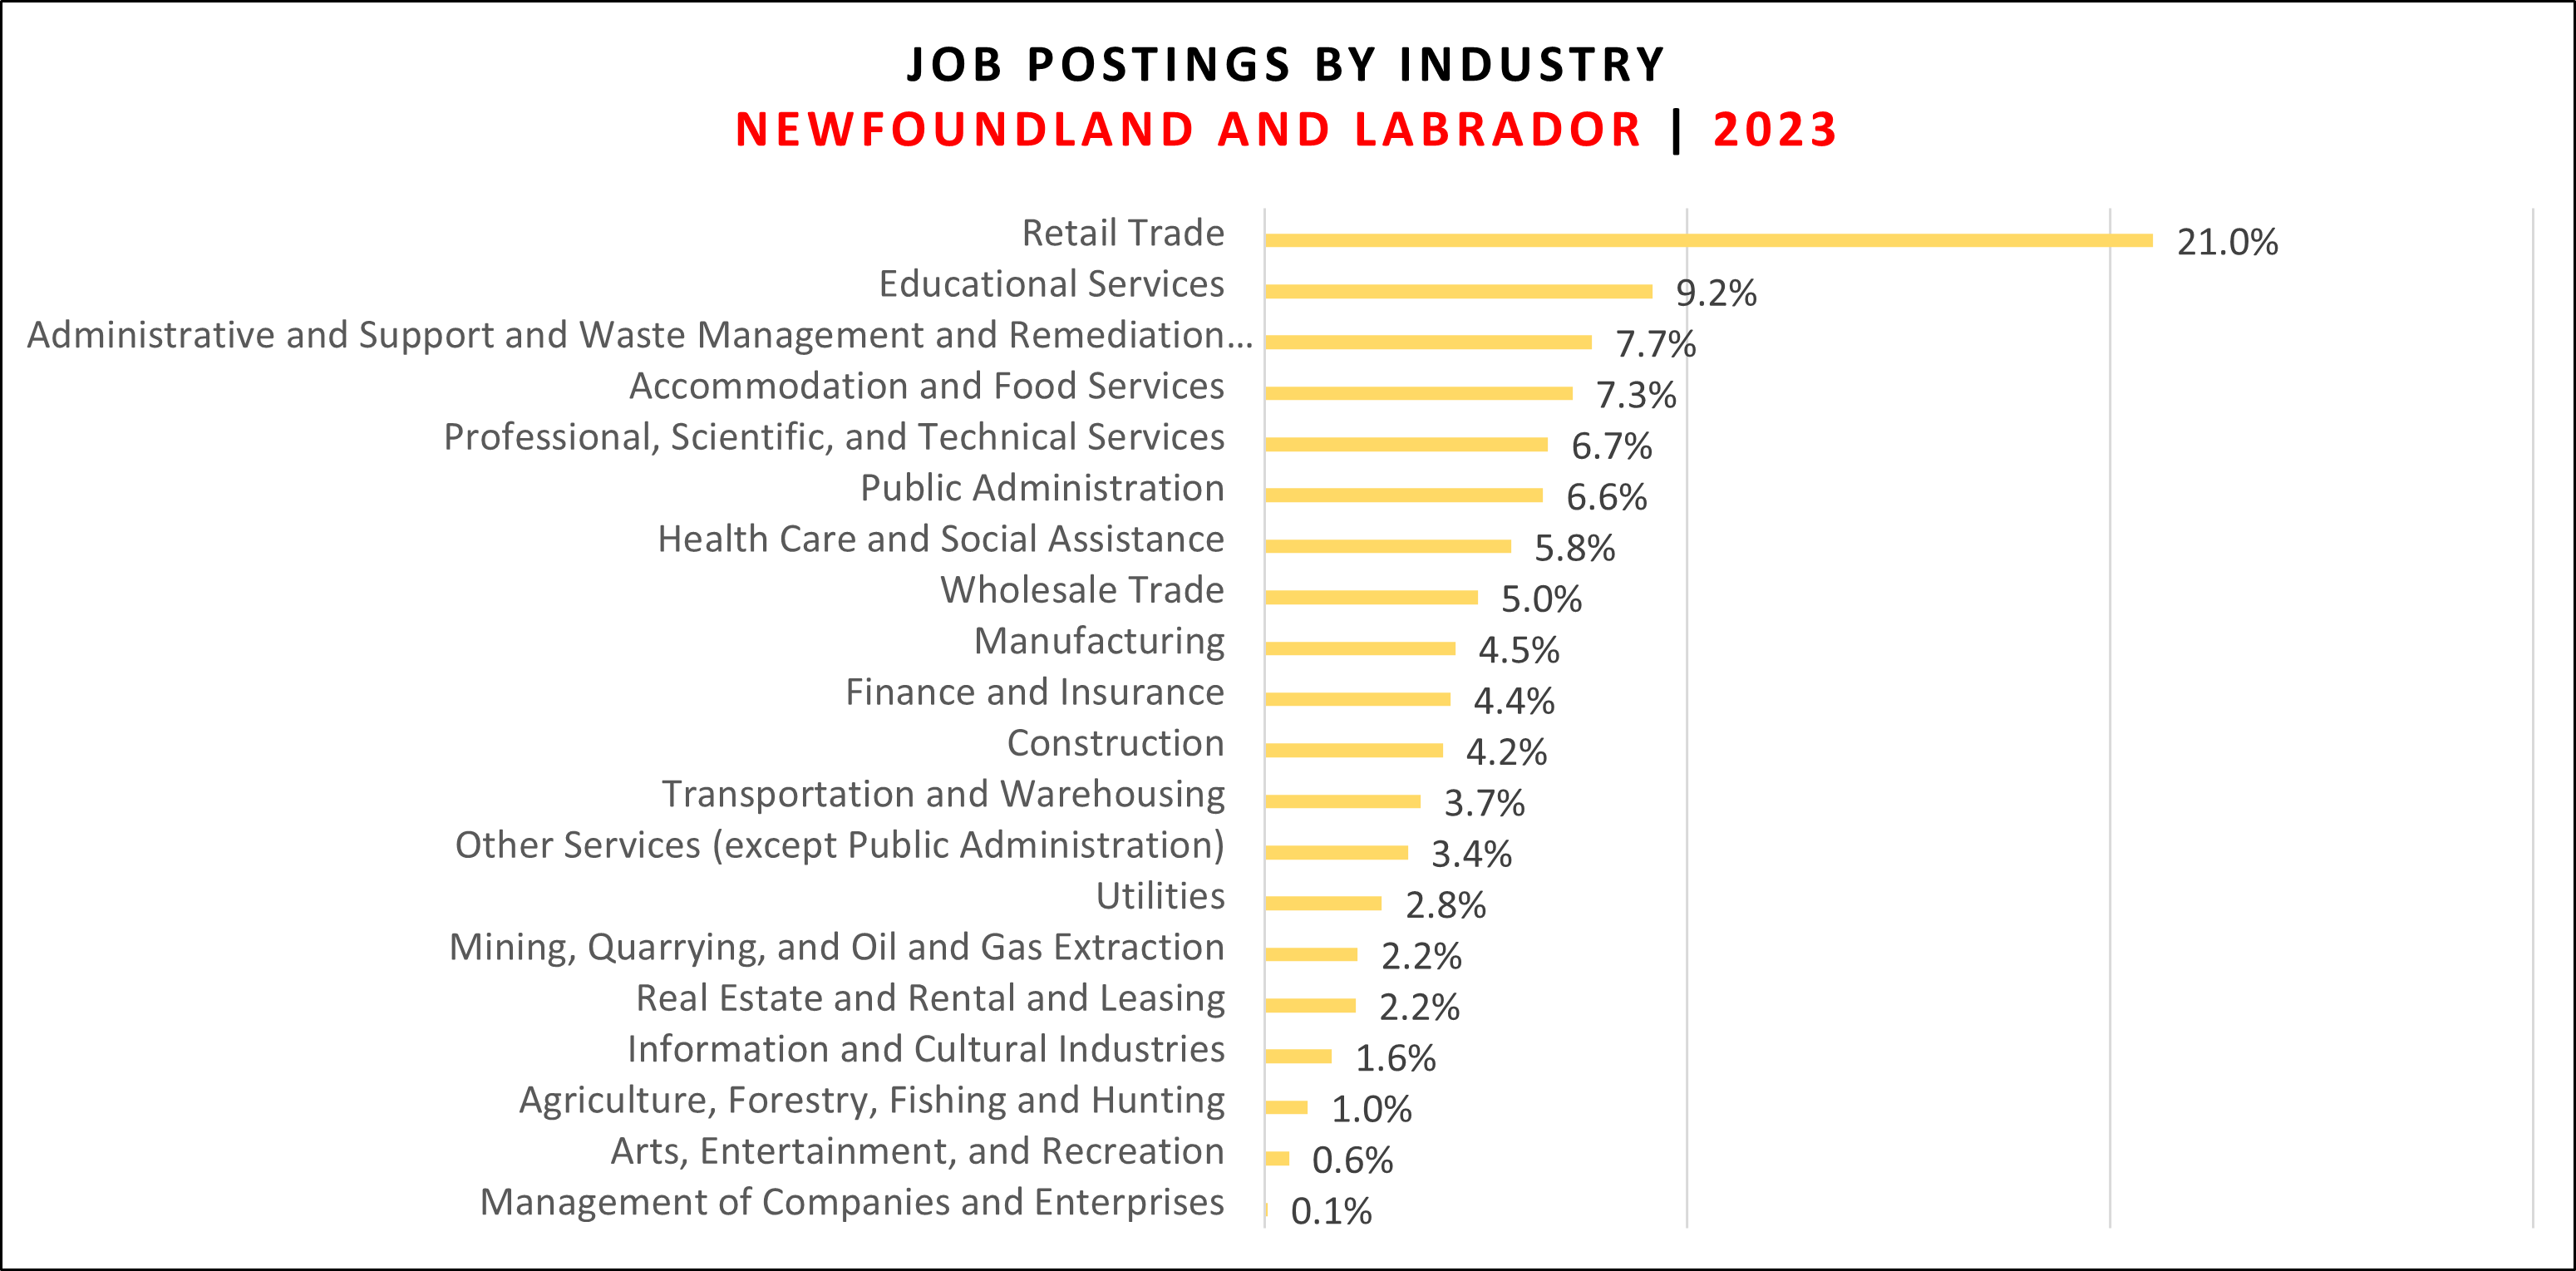 Top industries with job postings in NL for 2023.